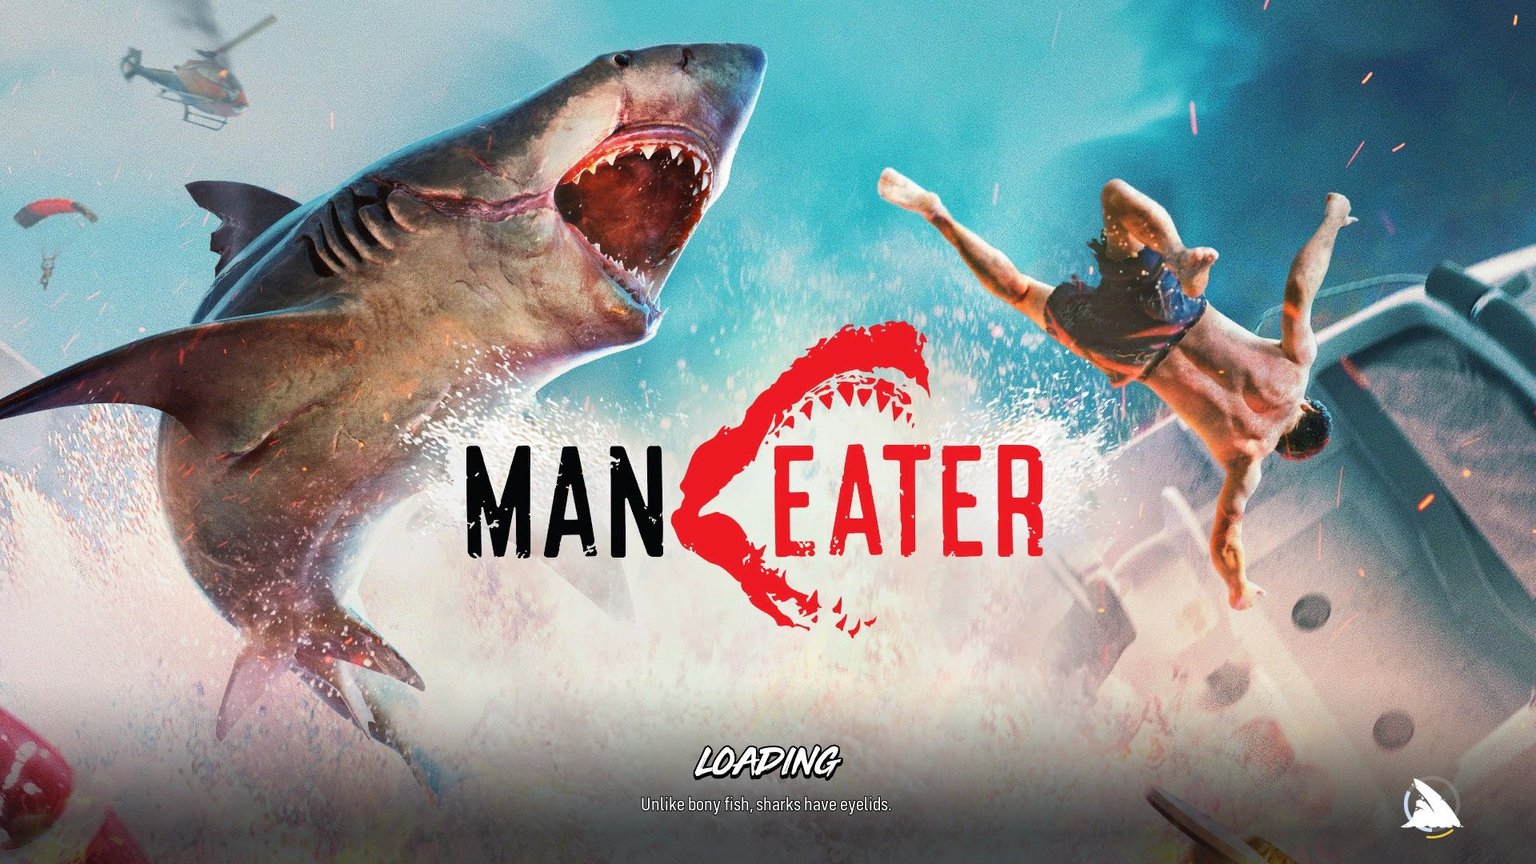 Jaws Unleashed in New Images from Video Game 'Maneater,' Where You